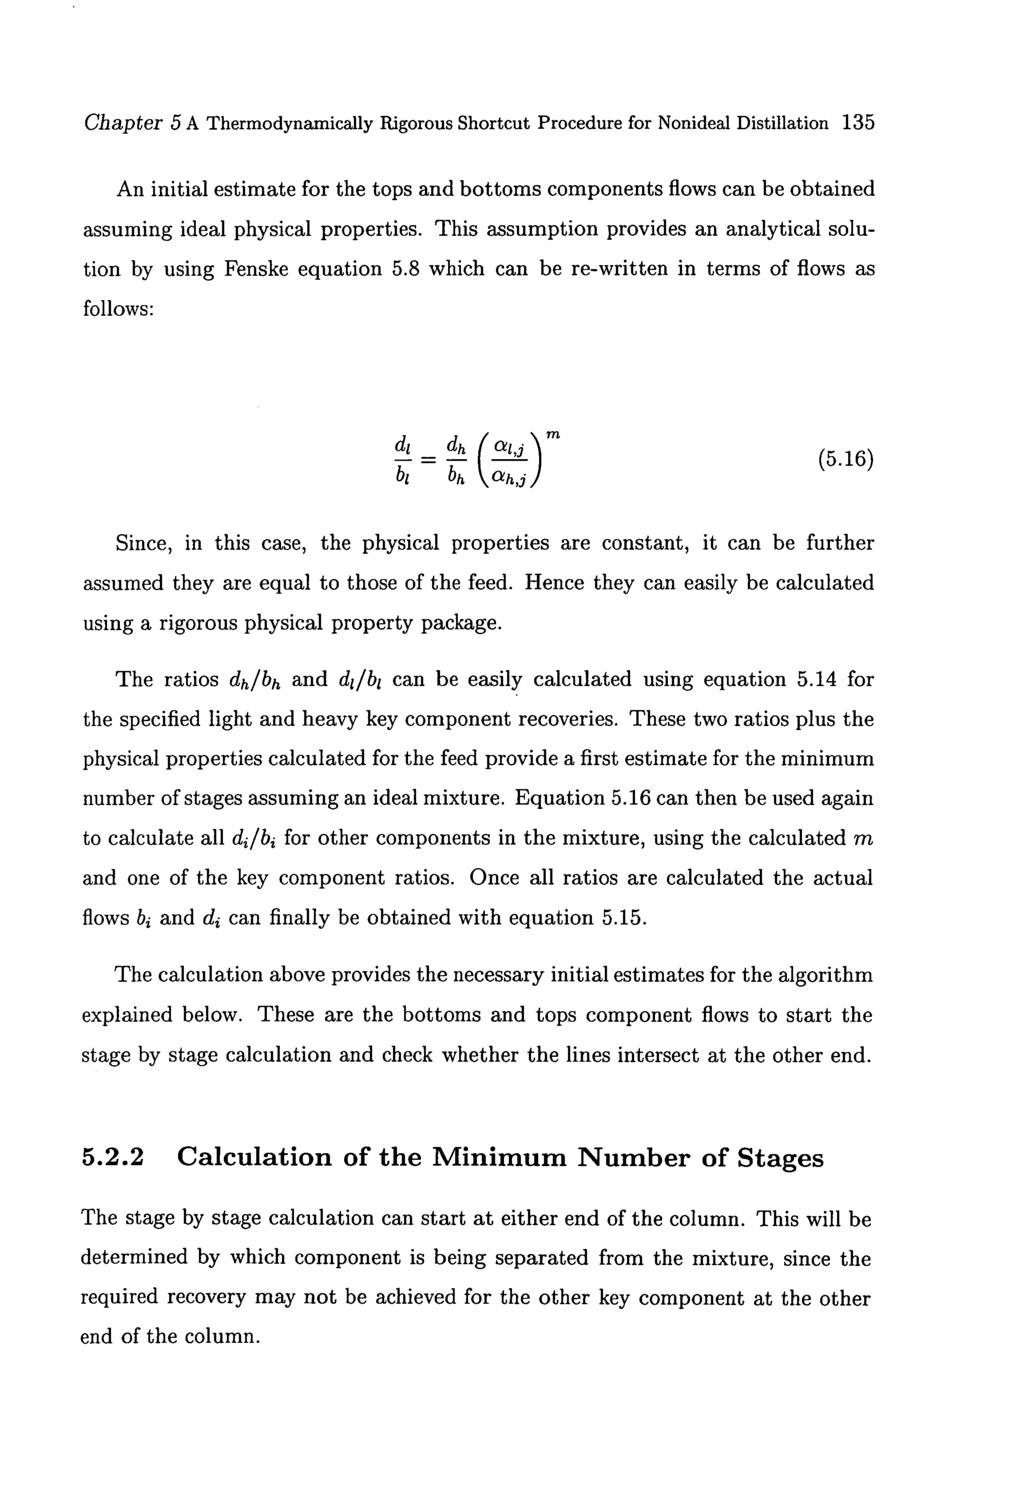 Chapter 5 A Thermodynamically Rigorous Shortcut Procedure for Nonideal Distillation 135 An initial estimate for the tops and bottoms components flows can be obtained assuming ideal physical